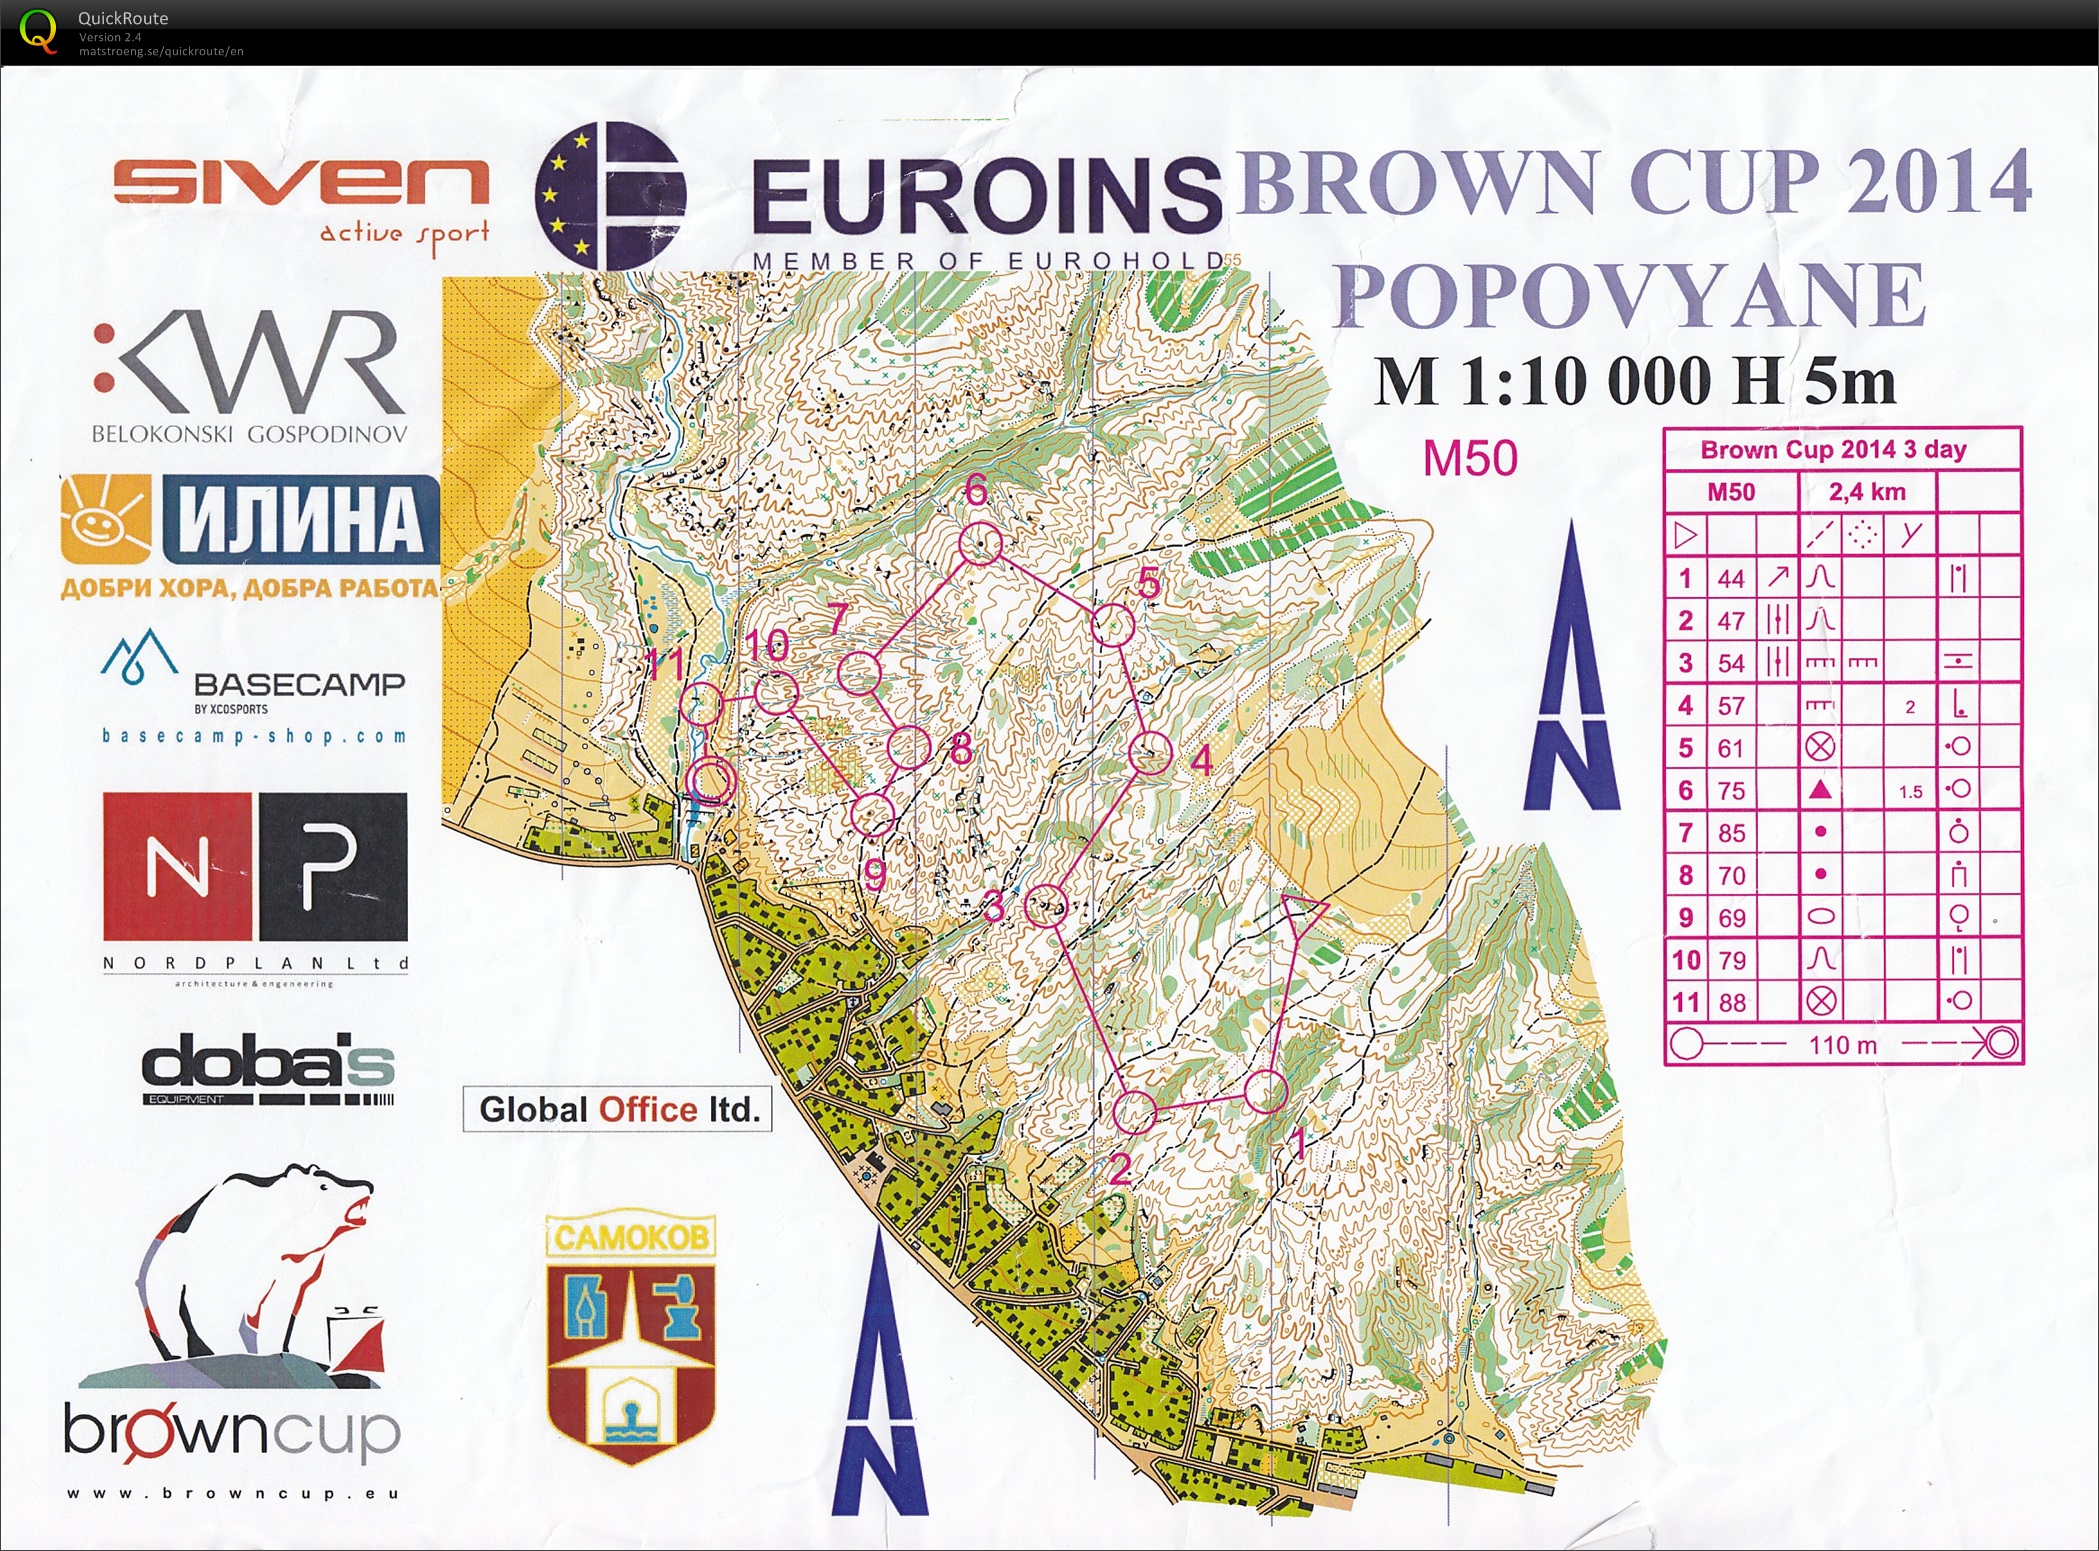 Brown-Cup 2014 E3 (05/05/2014)